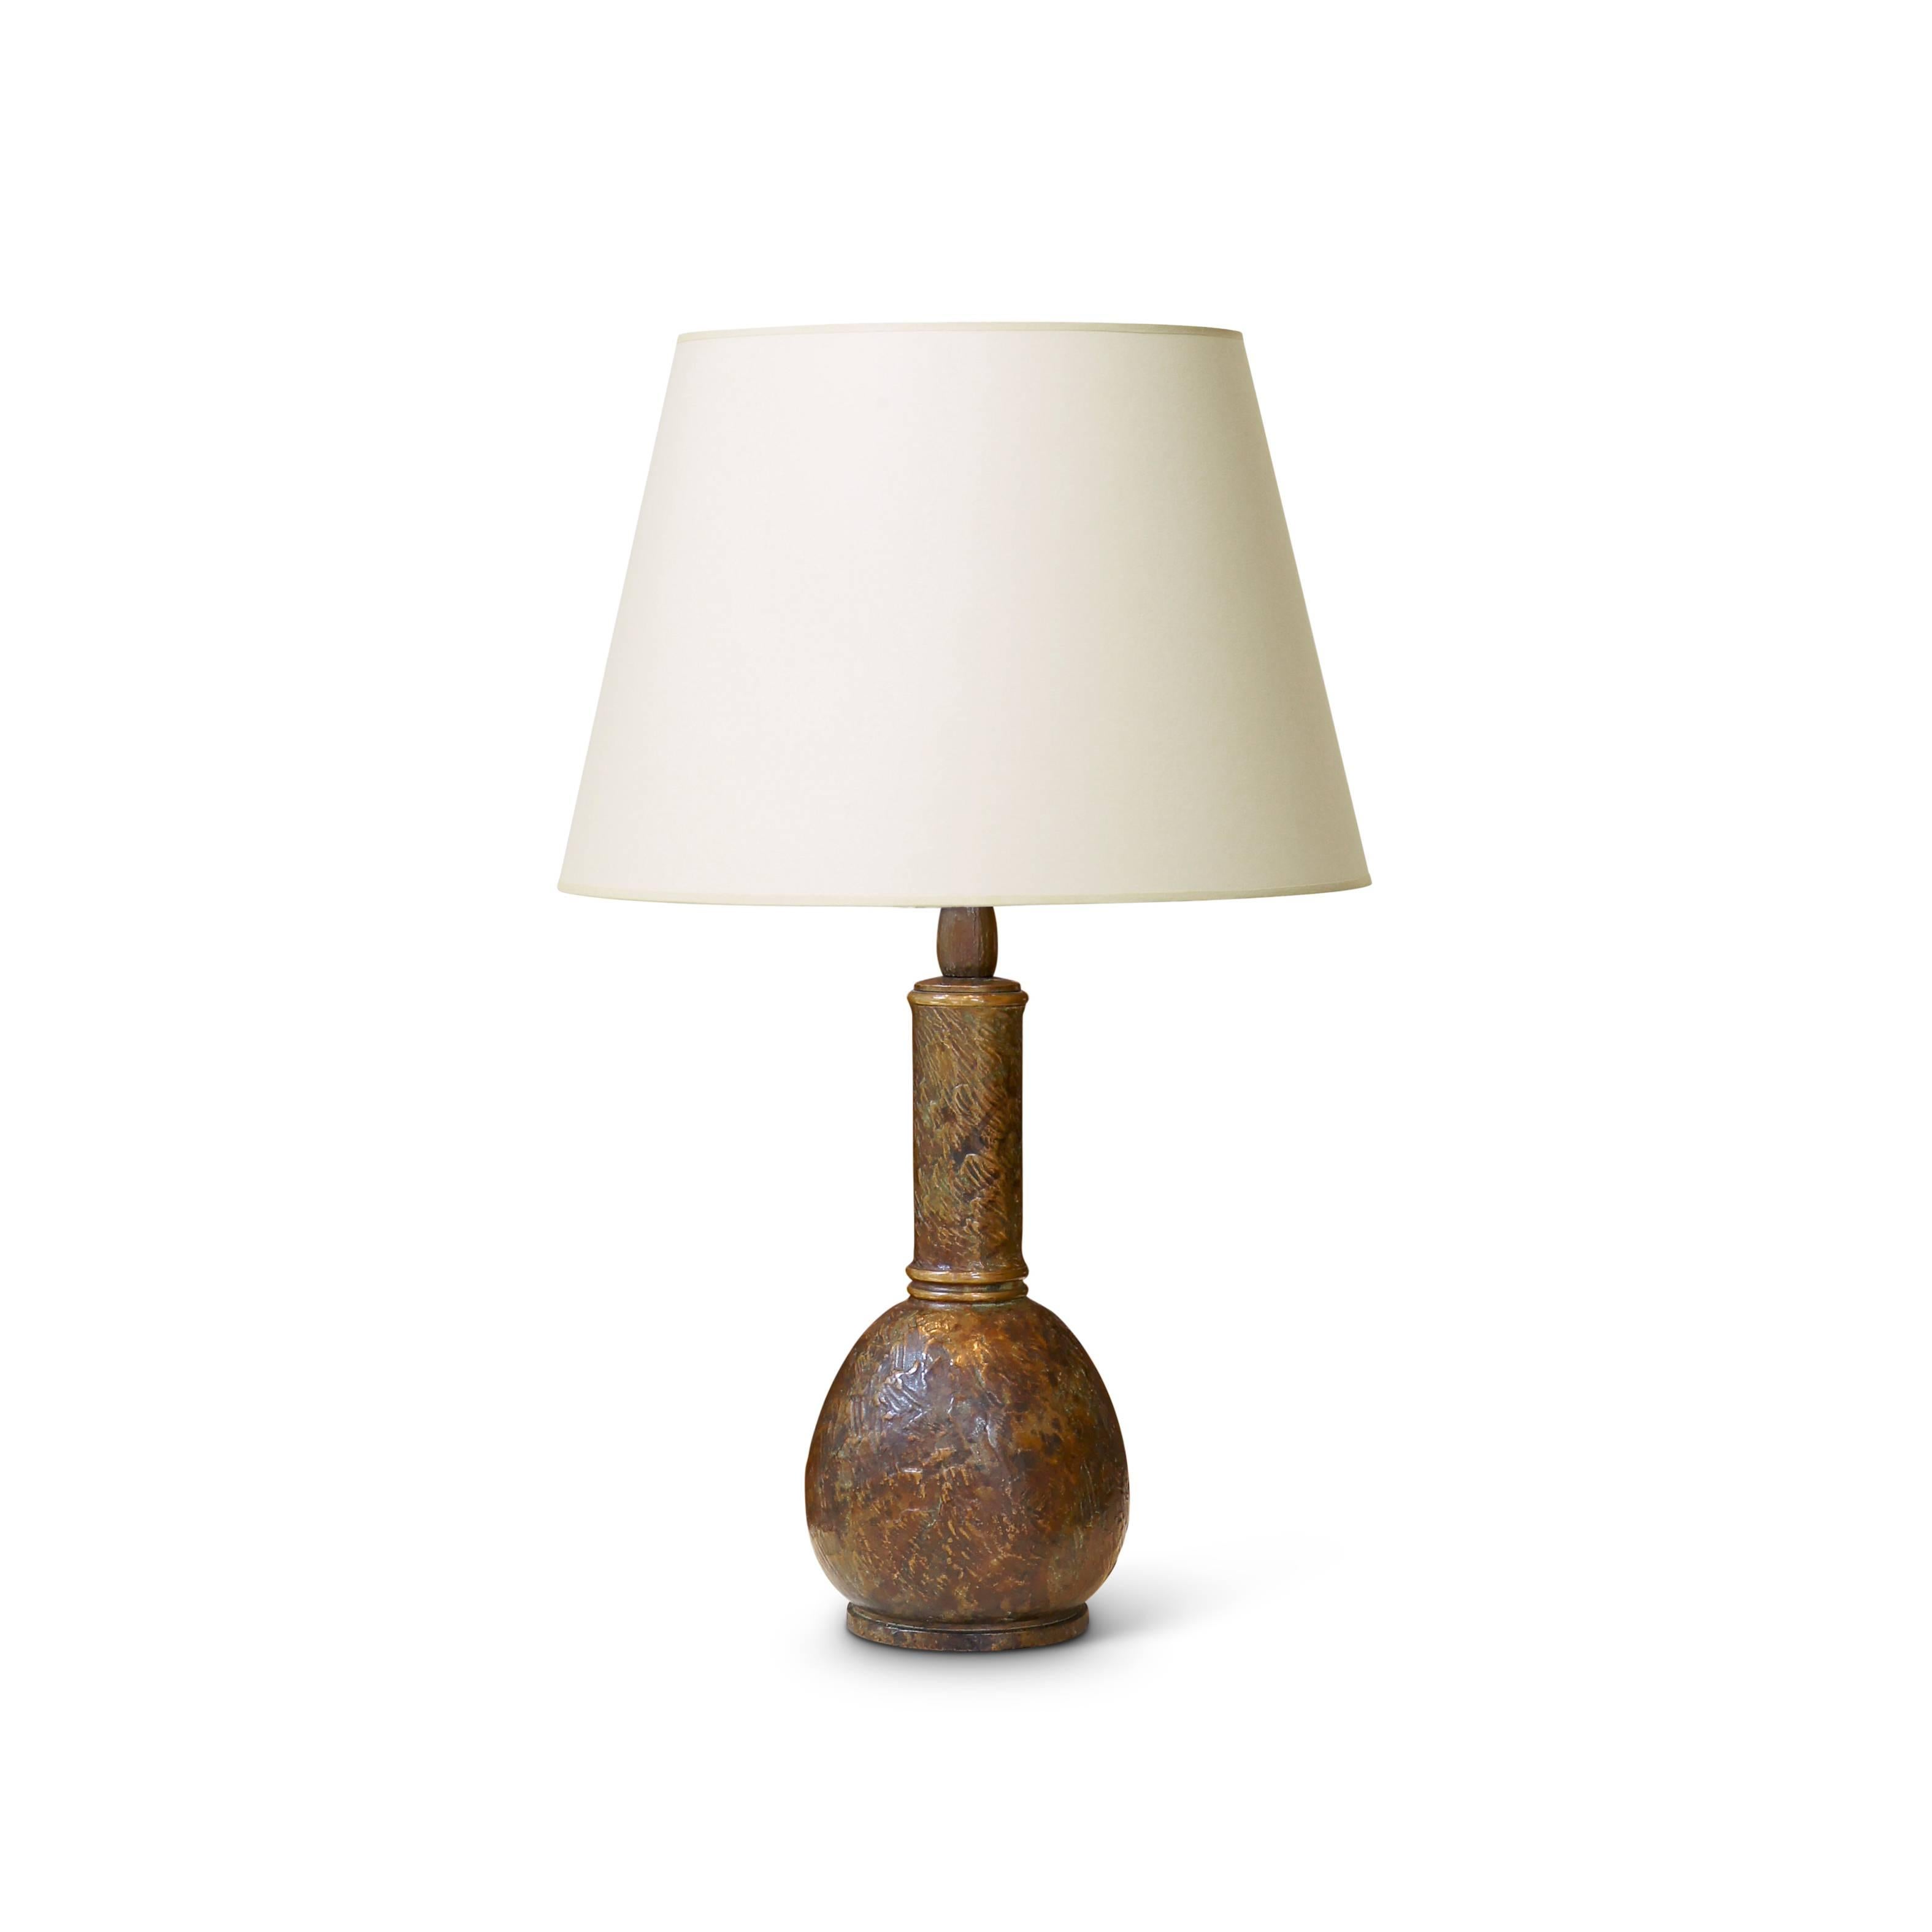 Table lamp by master metal founder and artist Evan Jensen (1888-1978), having a bulb/drop shape base on a reveal plinth and having a long neck (model 654), articulated with burnished ring motifs at base and top of neck and having entire surface